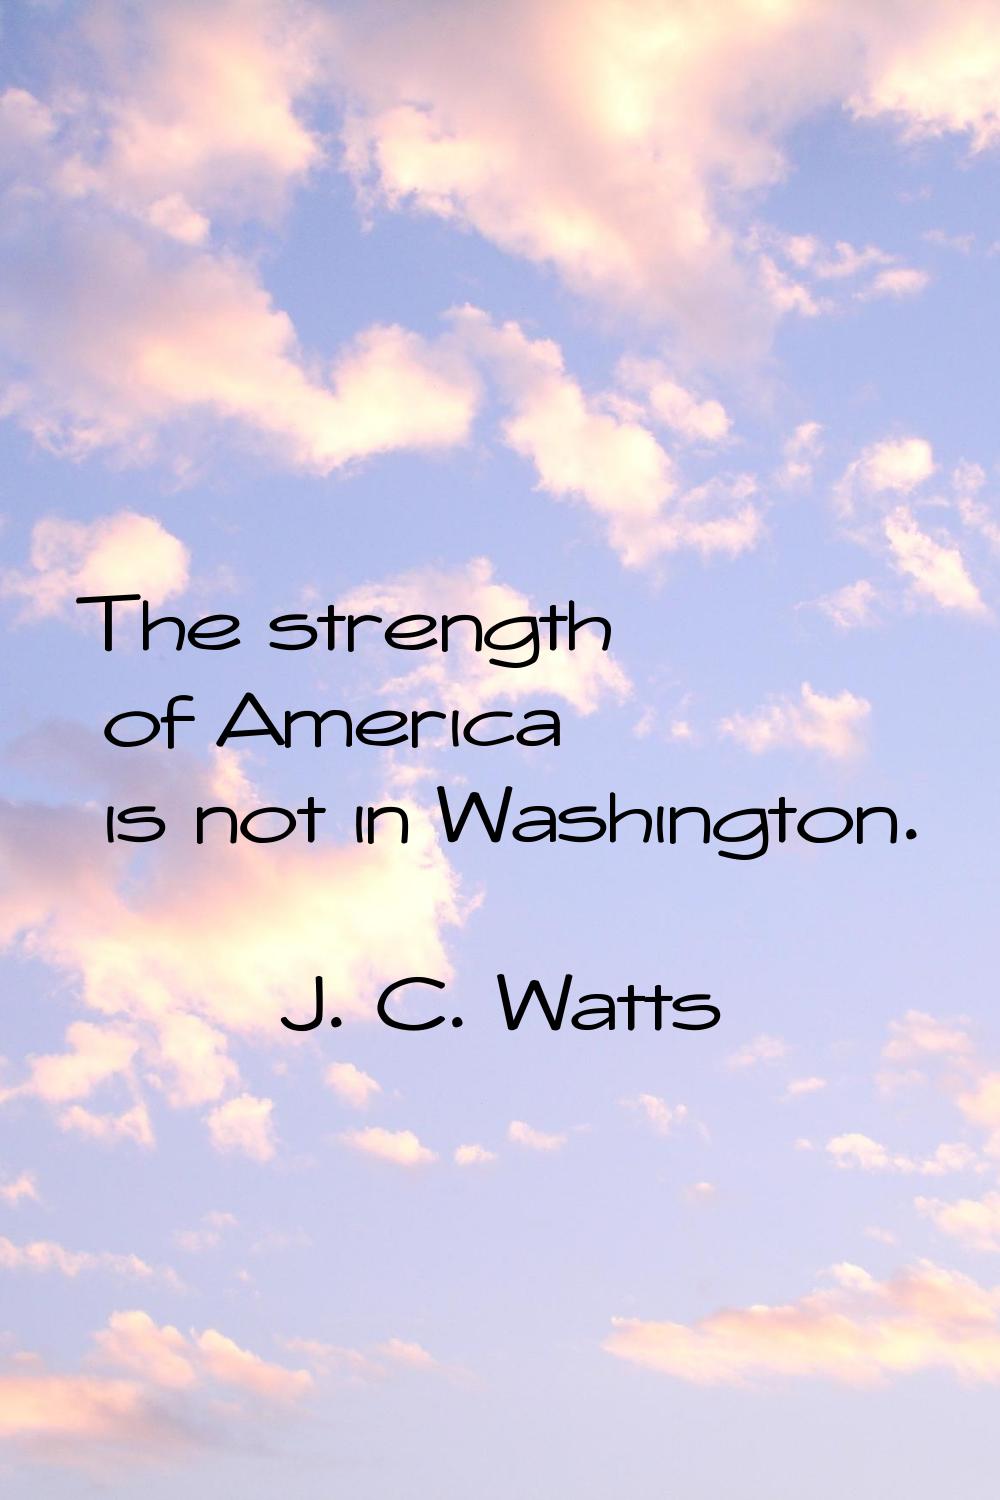 The strength of America is not in Washington.